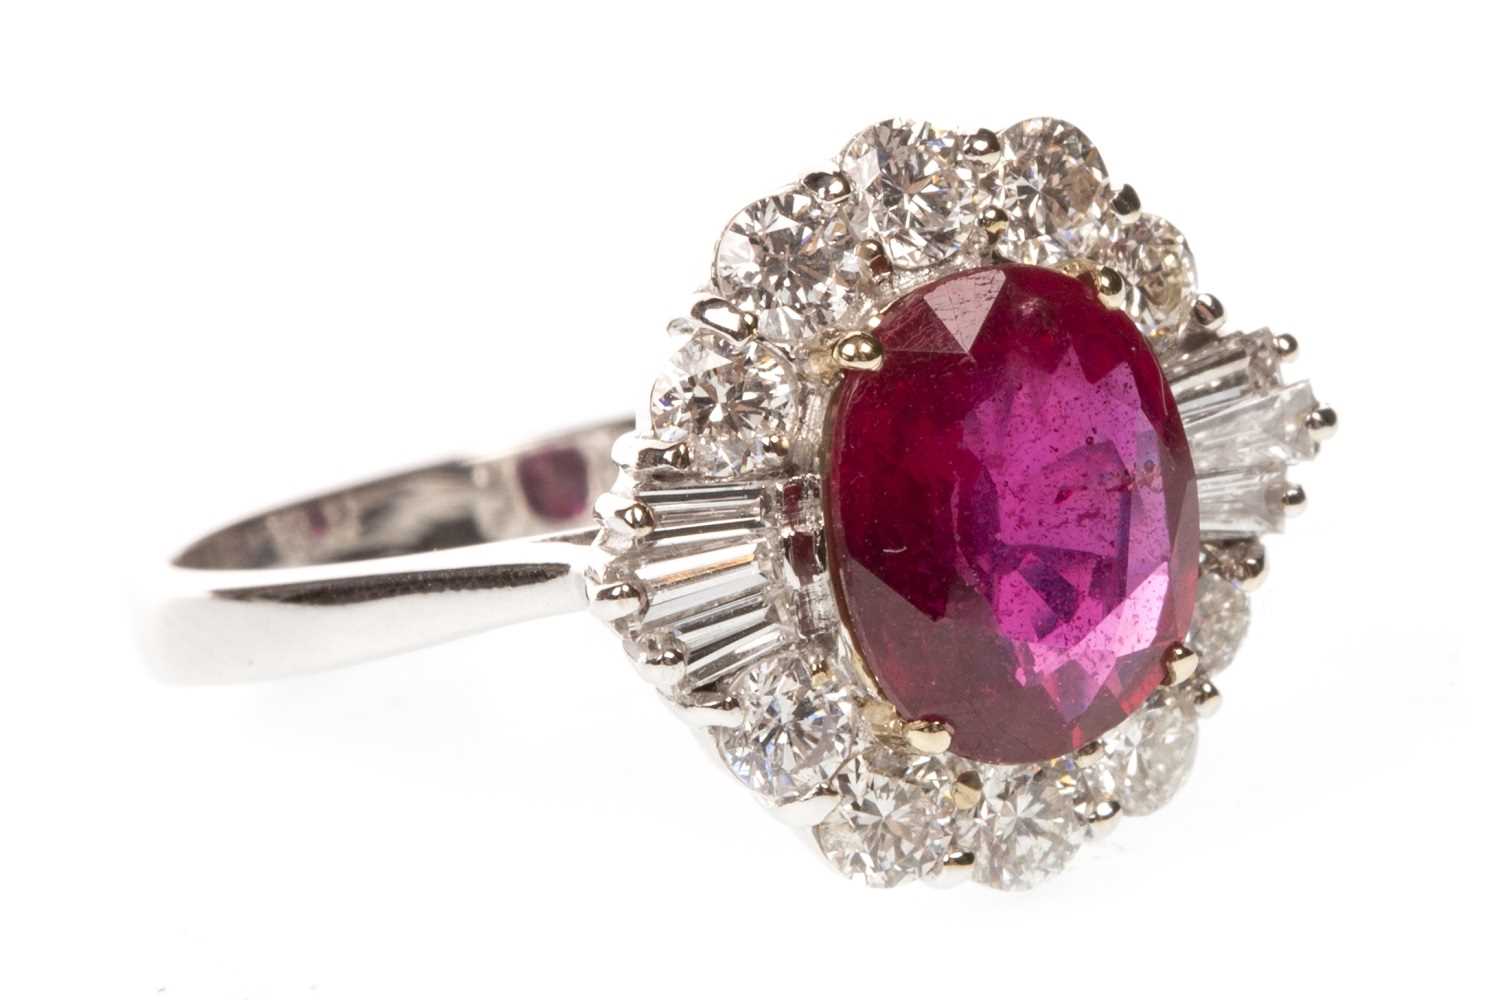 Lot 162 - A RUBY AND DIAMOND RING